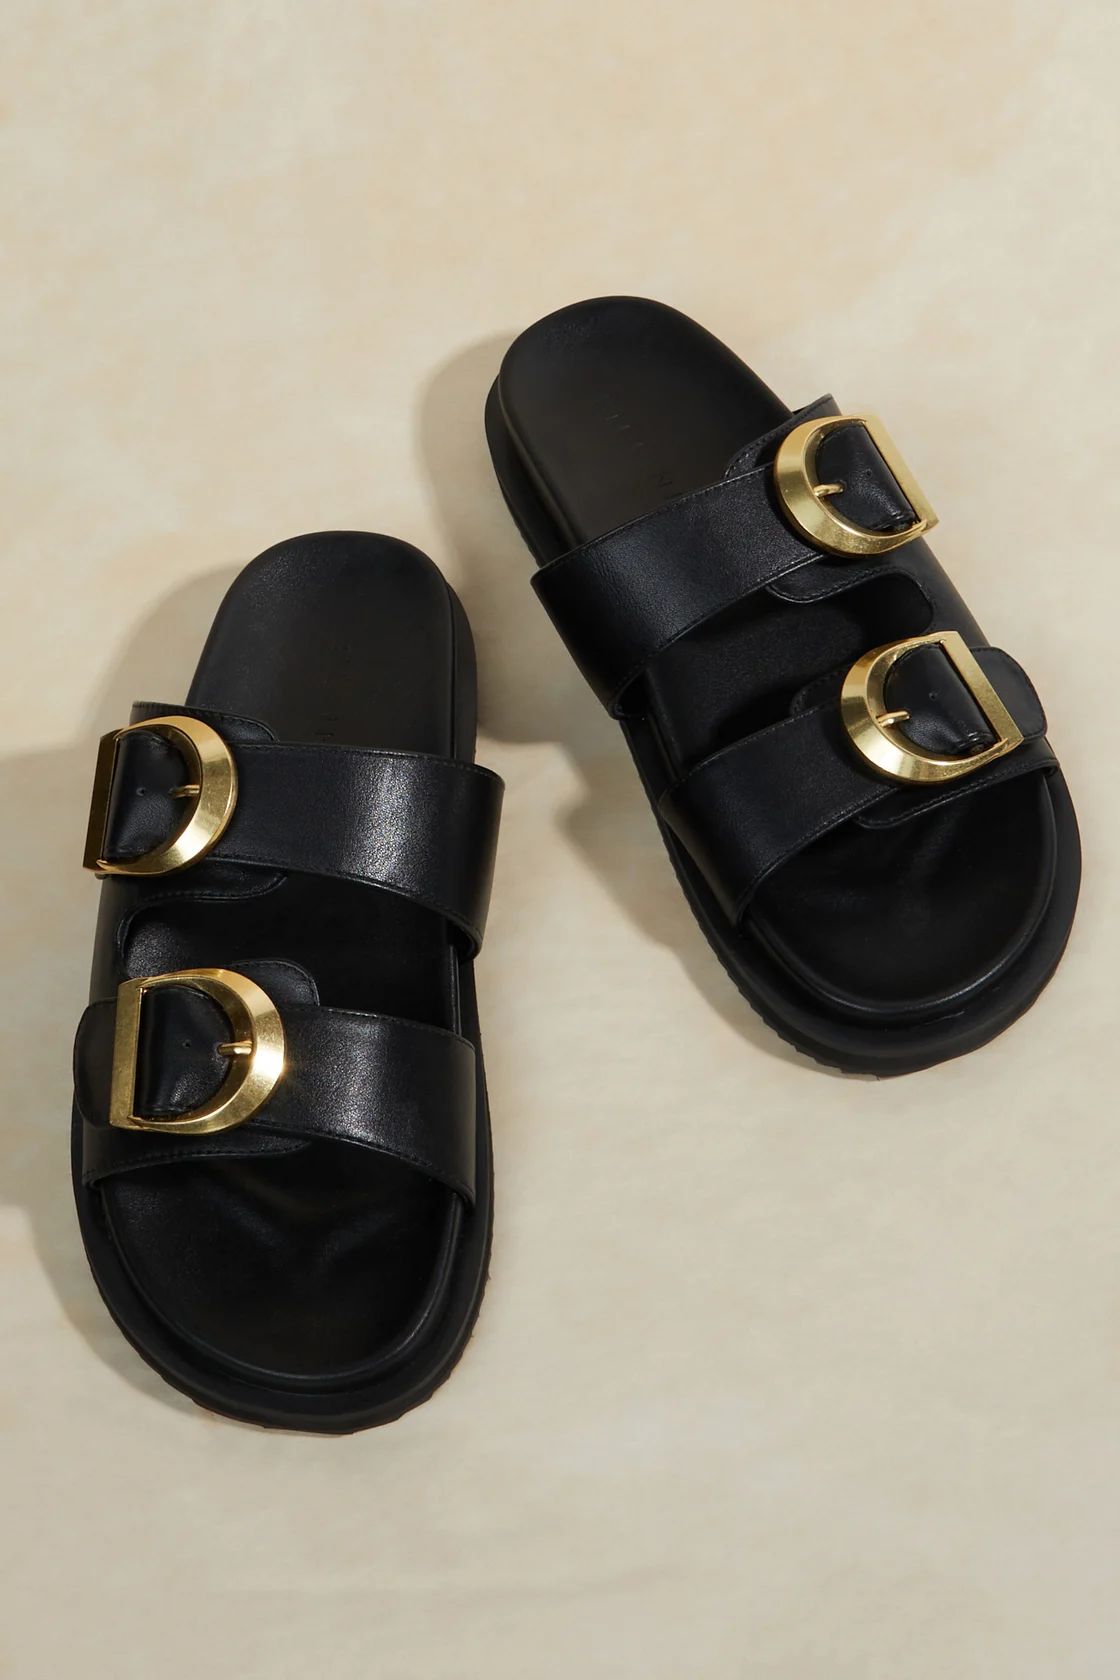 Tayo Sandals By Billini in Black | Altar'd State | Altar'd State